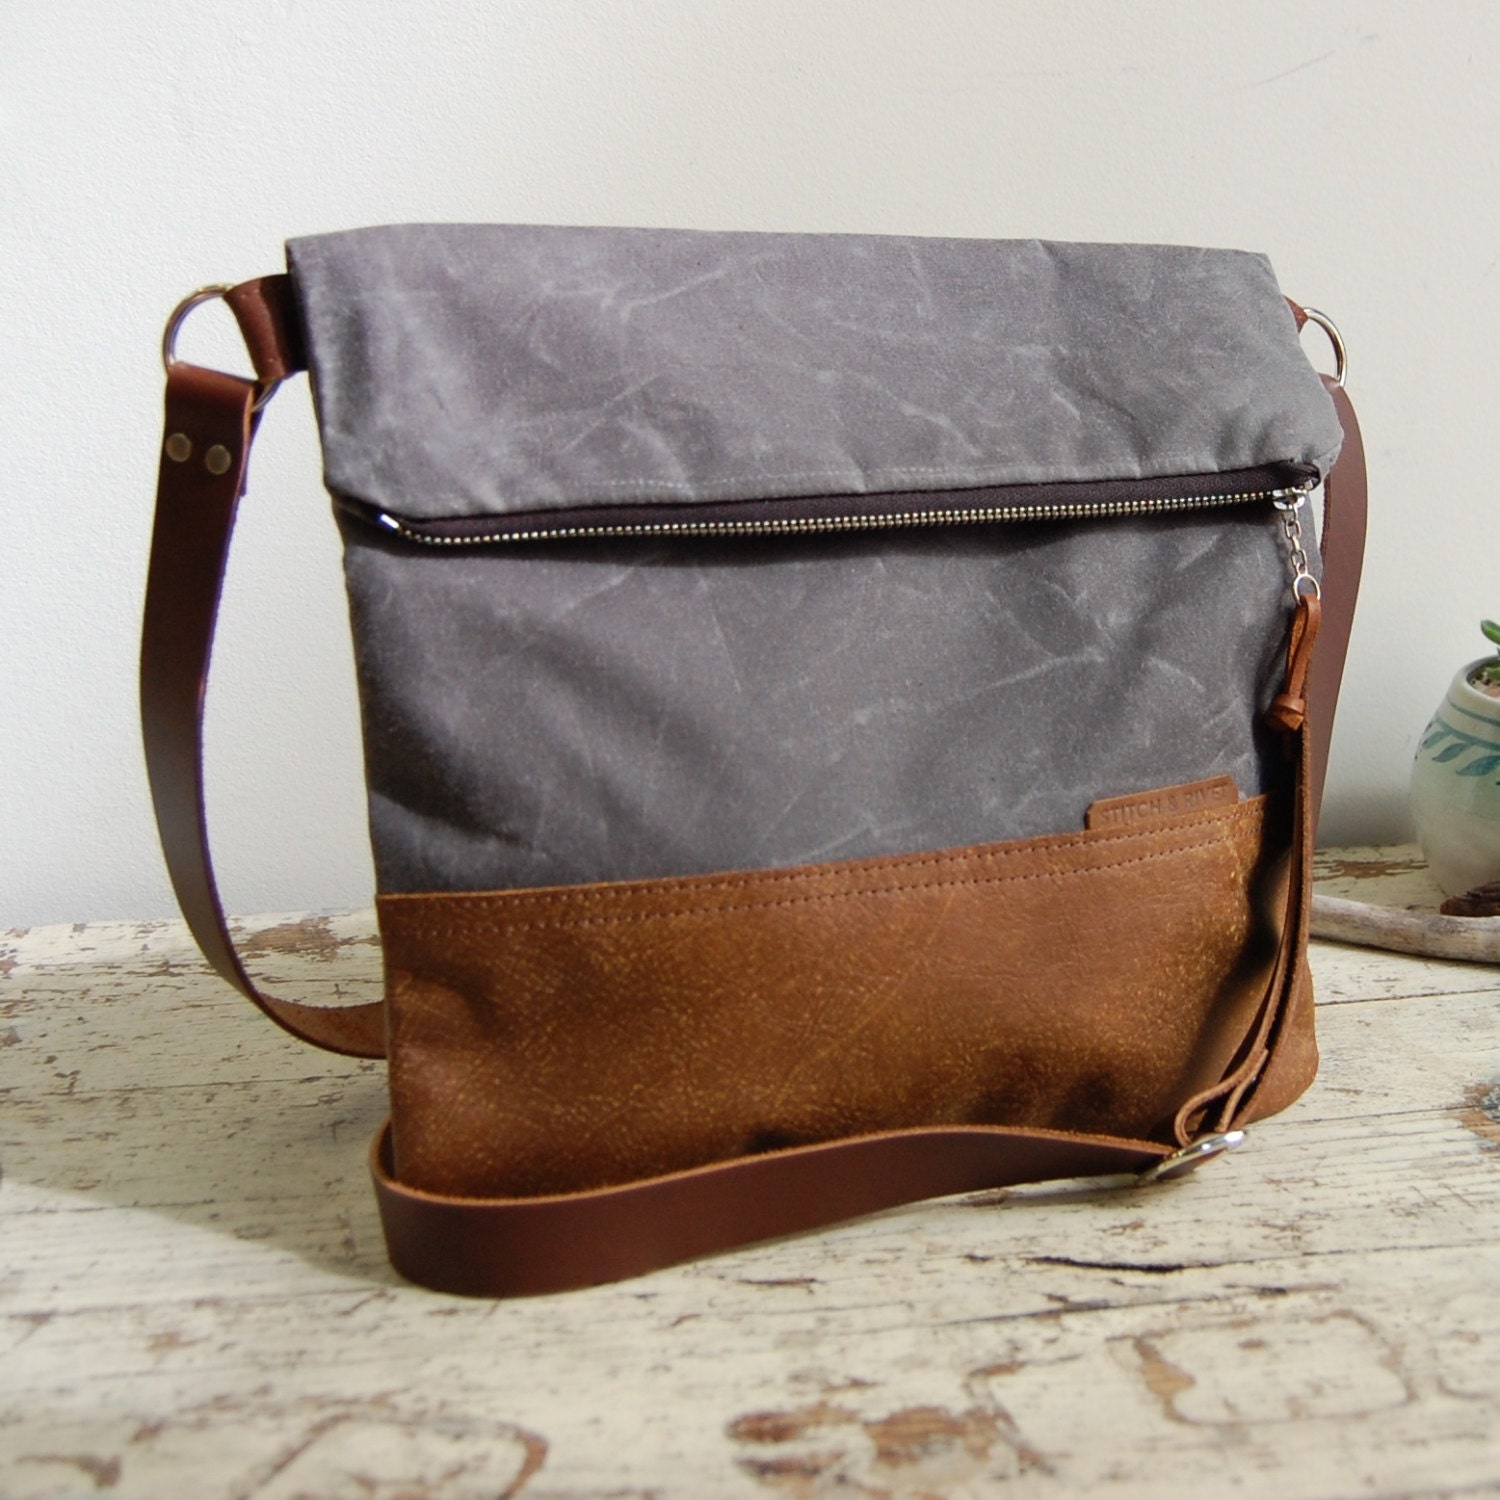 Waxed Canvas and Leather Foldover Crossbody Bag by StitchandRivet